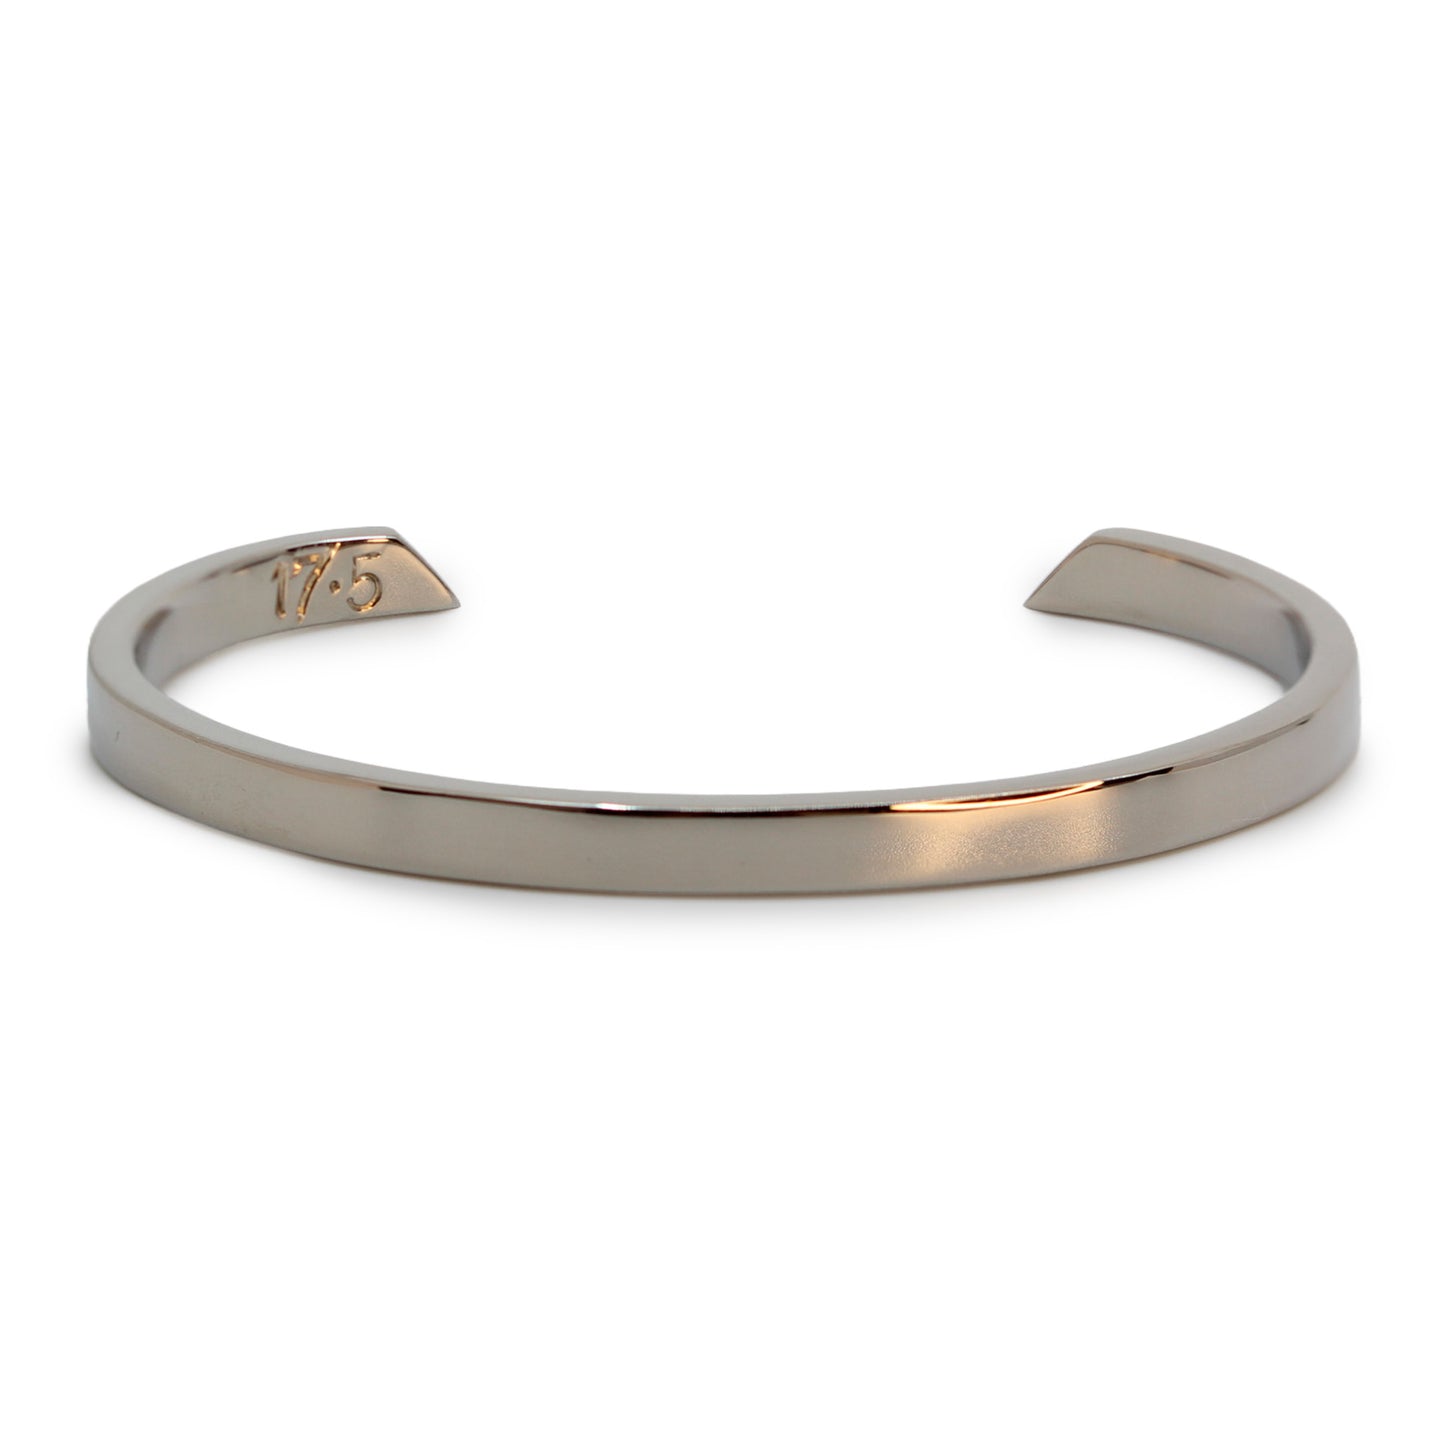 Close-up view of a polished silver bracelet with a minimalist design, featuring an engraved '17.5' on one end.